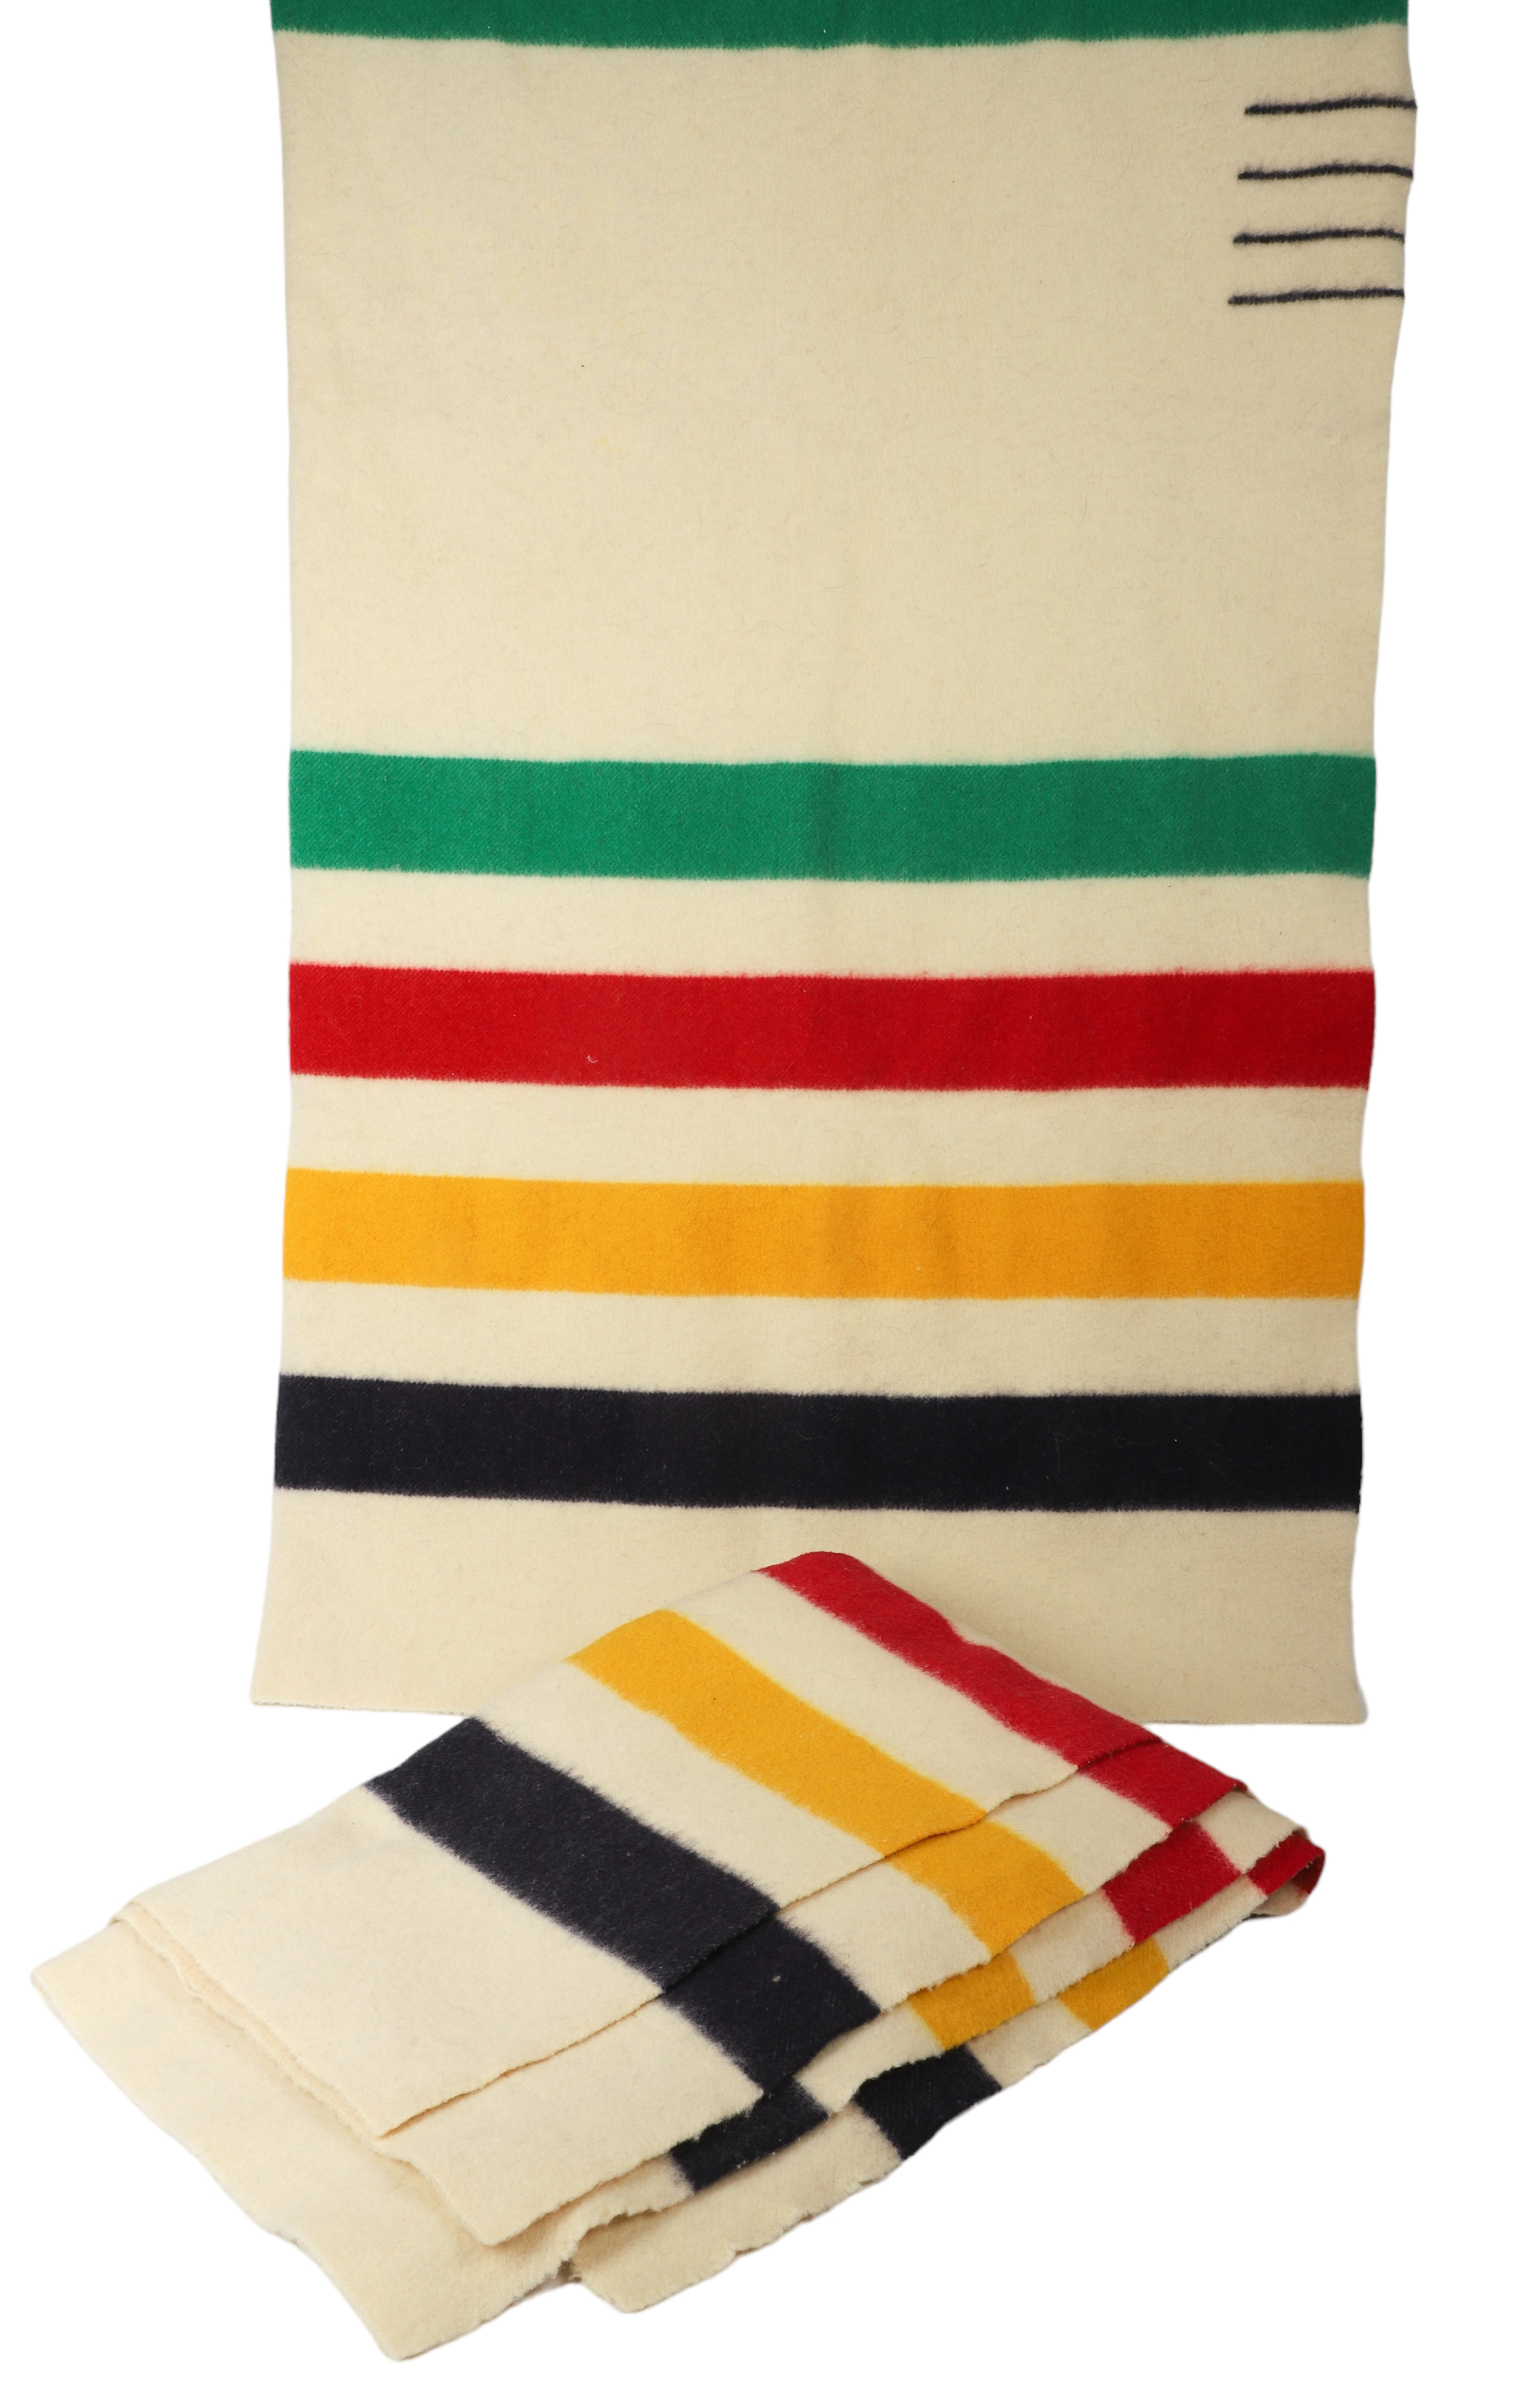 (2) Hudson Bay point blankets, all wool,